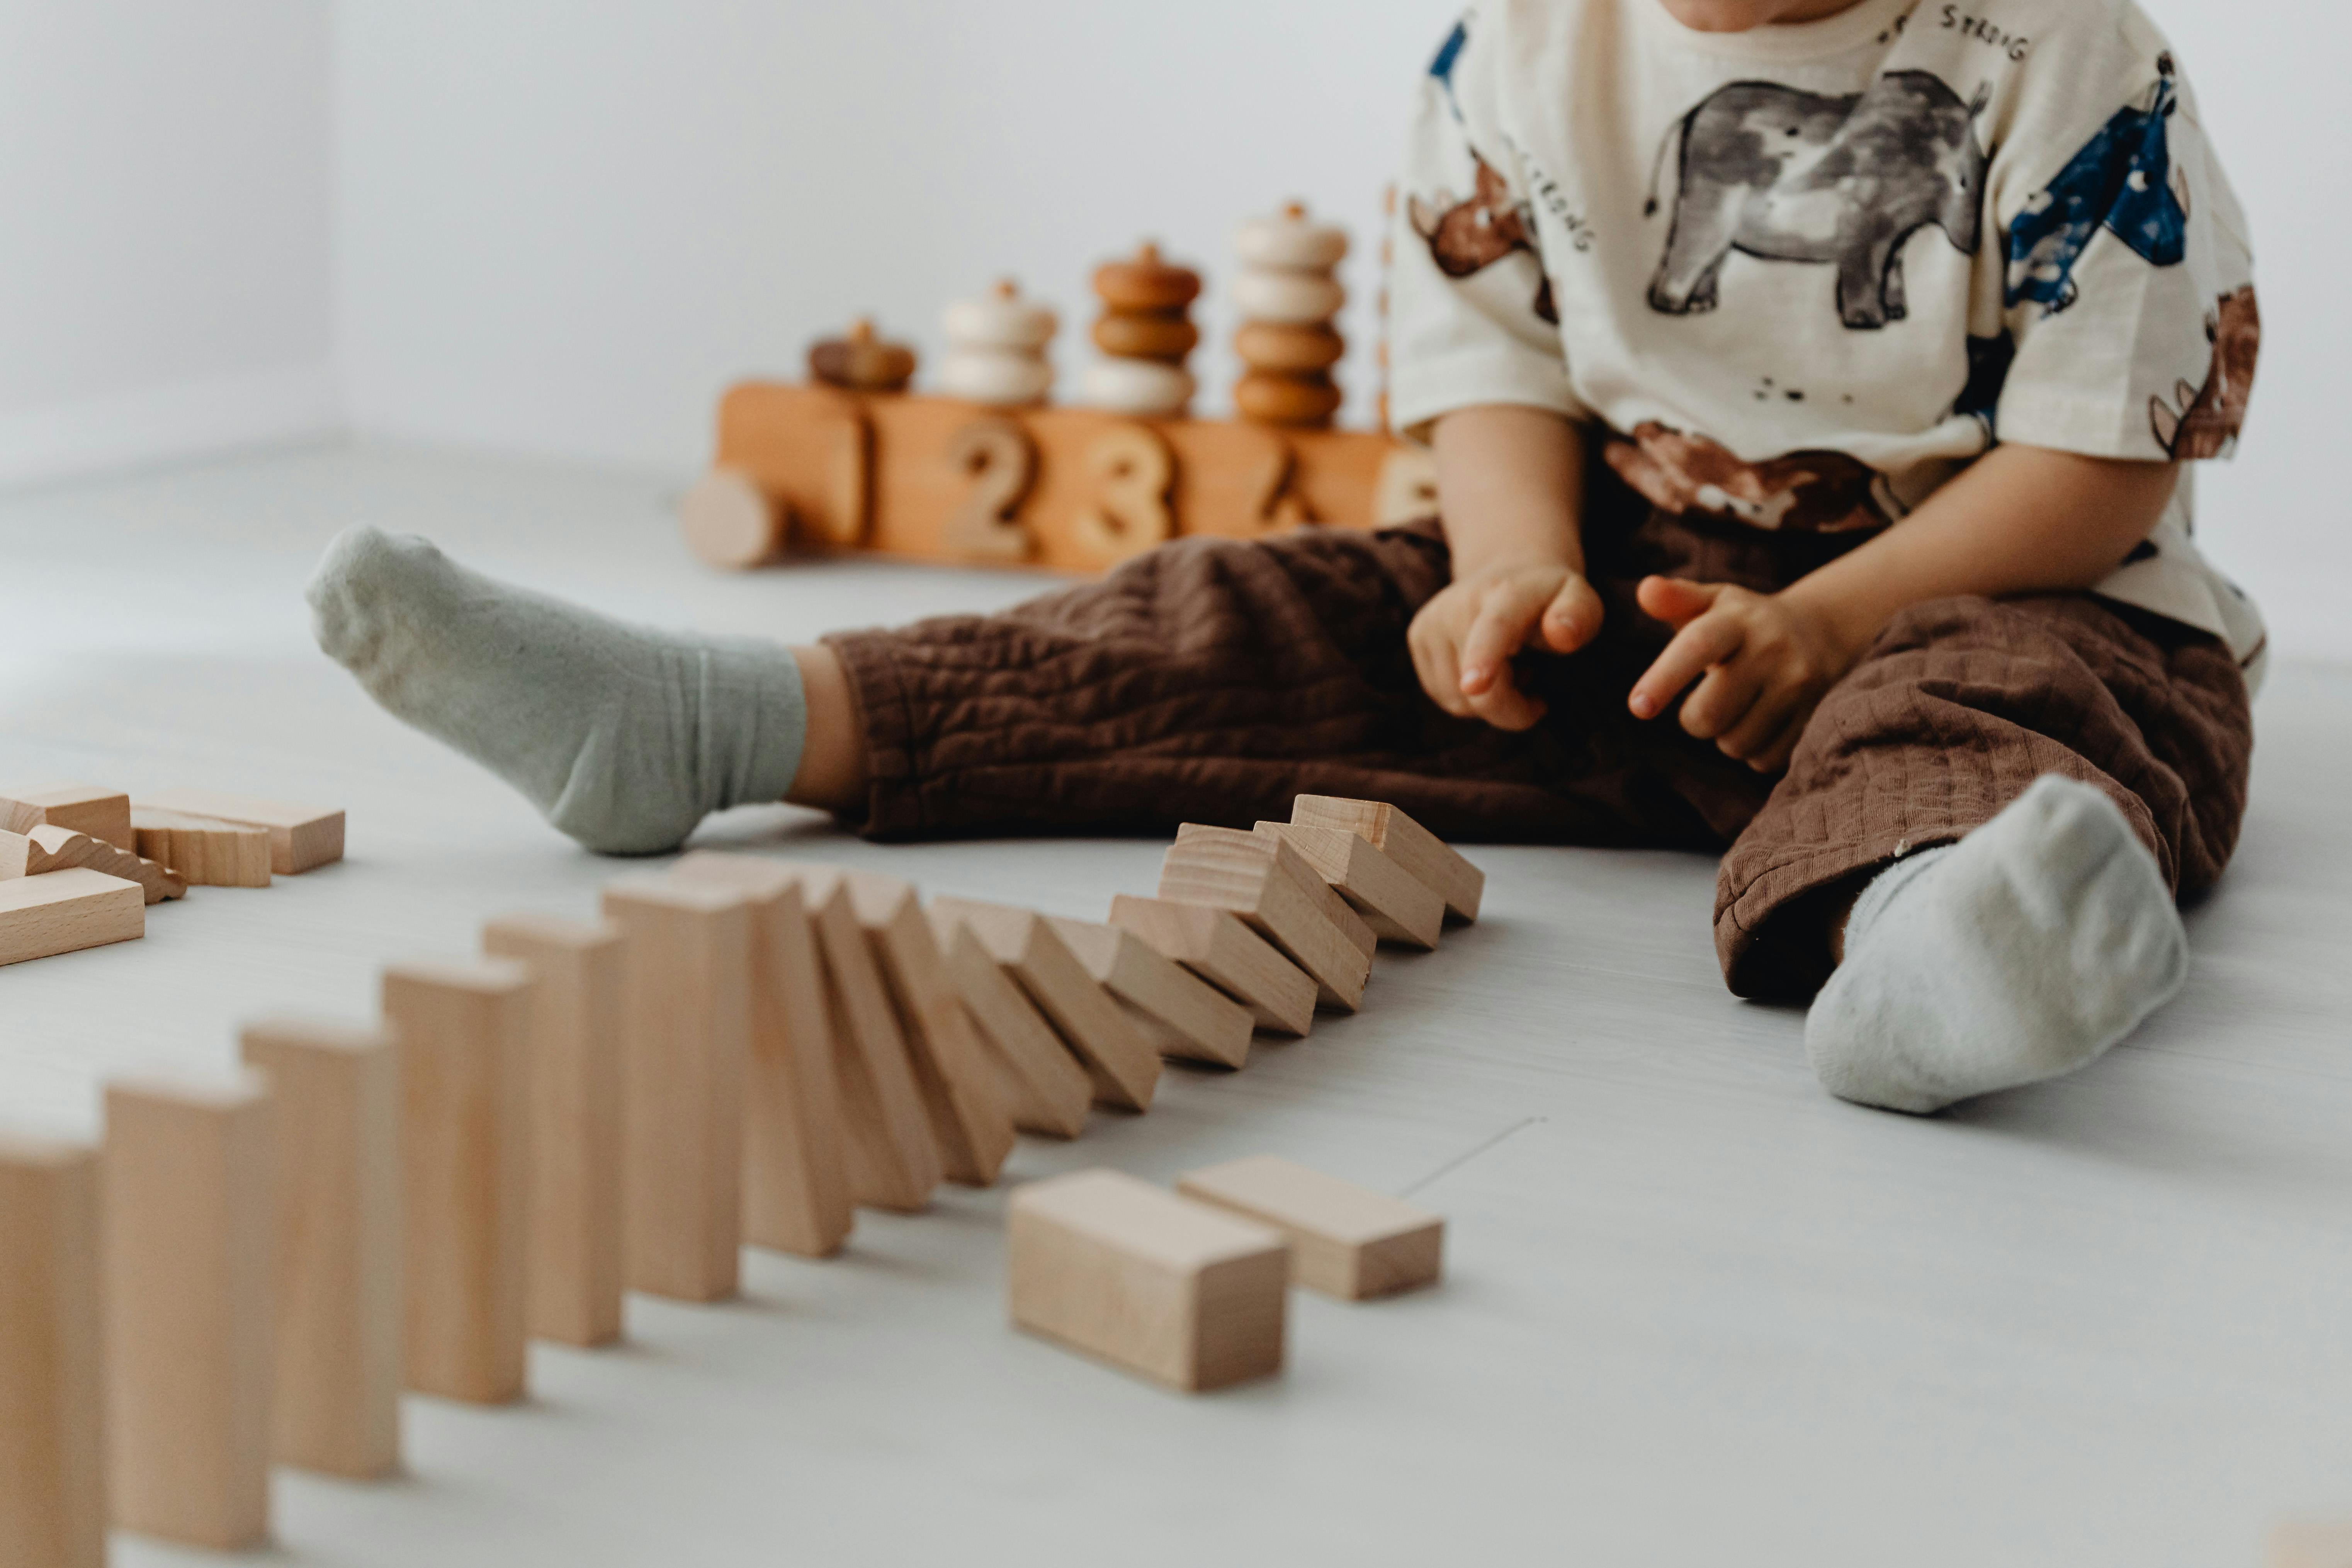 A baby playing with wooden toys | Source: Pexels